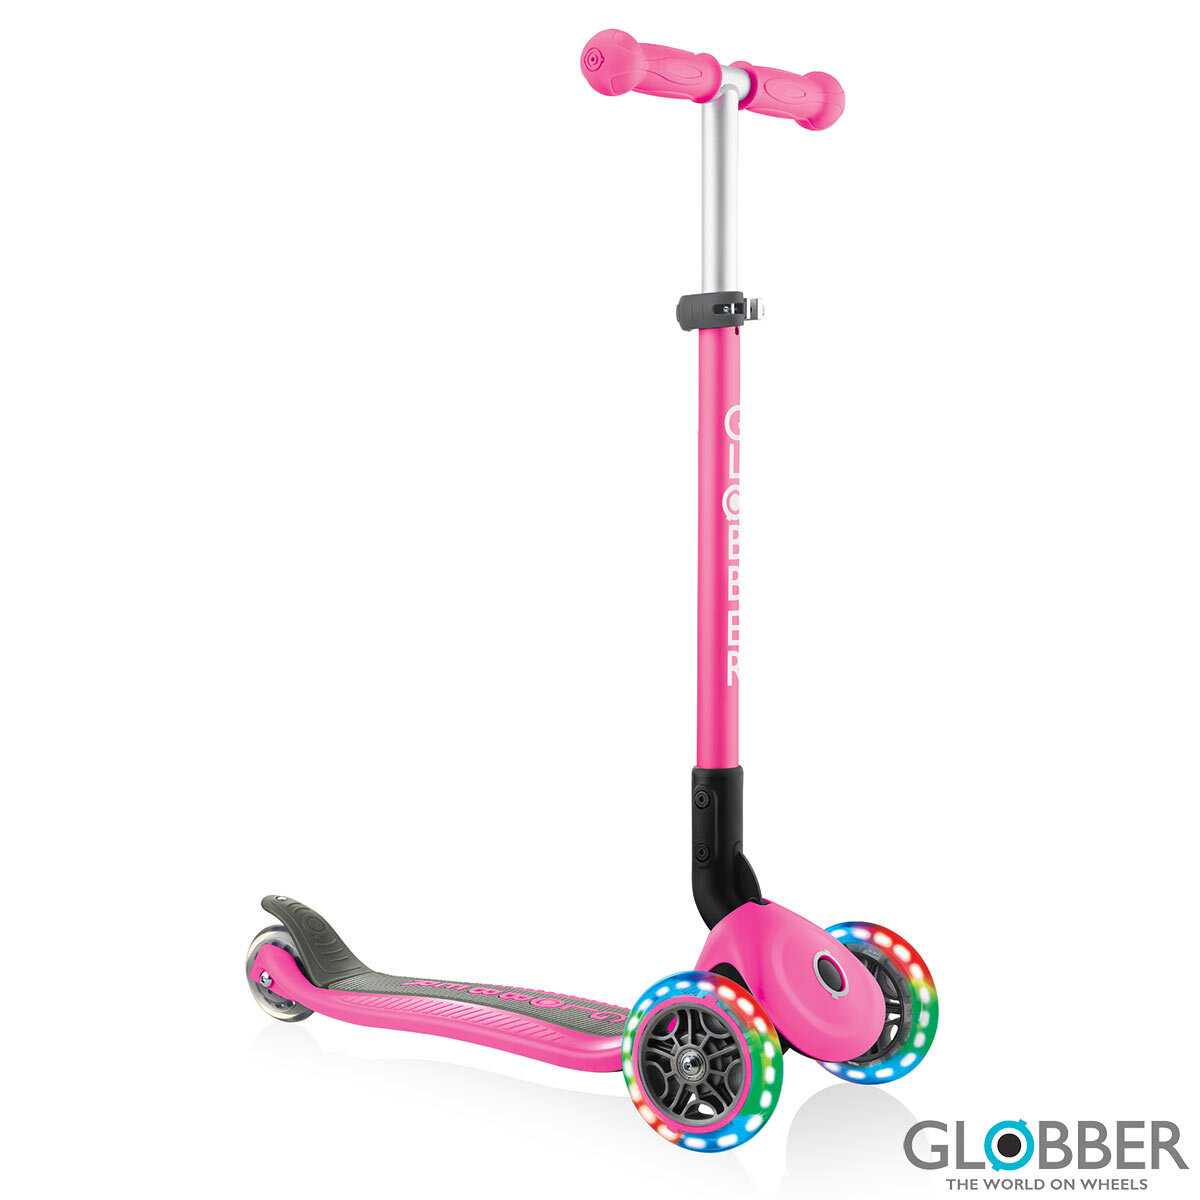 Buy Globber Primo Lights Scooter in Pink 1 Image at Costco.co.uk